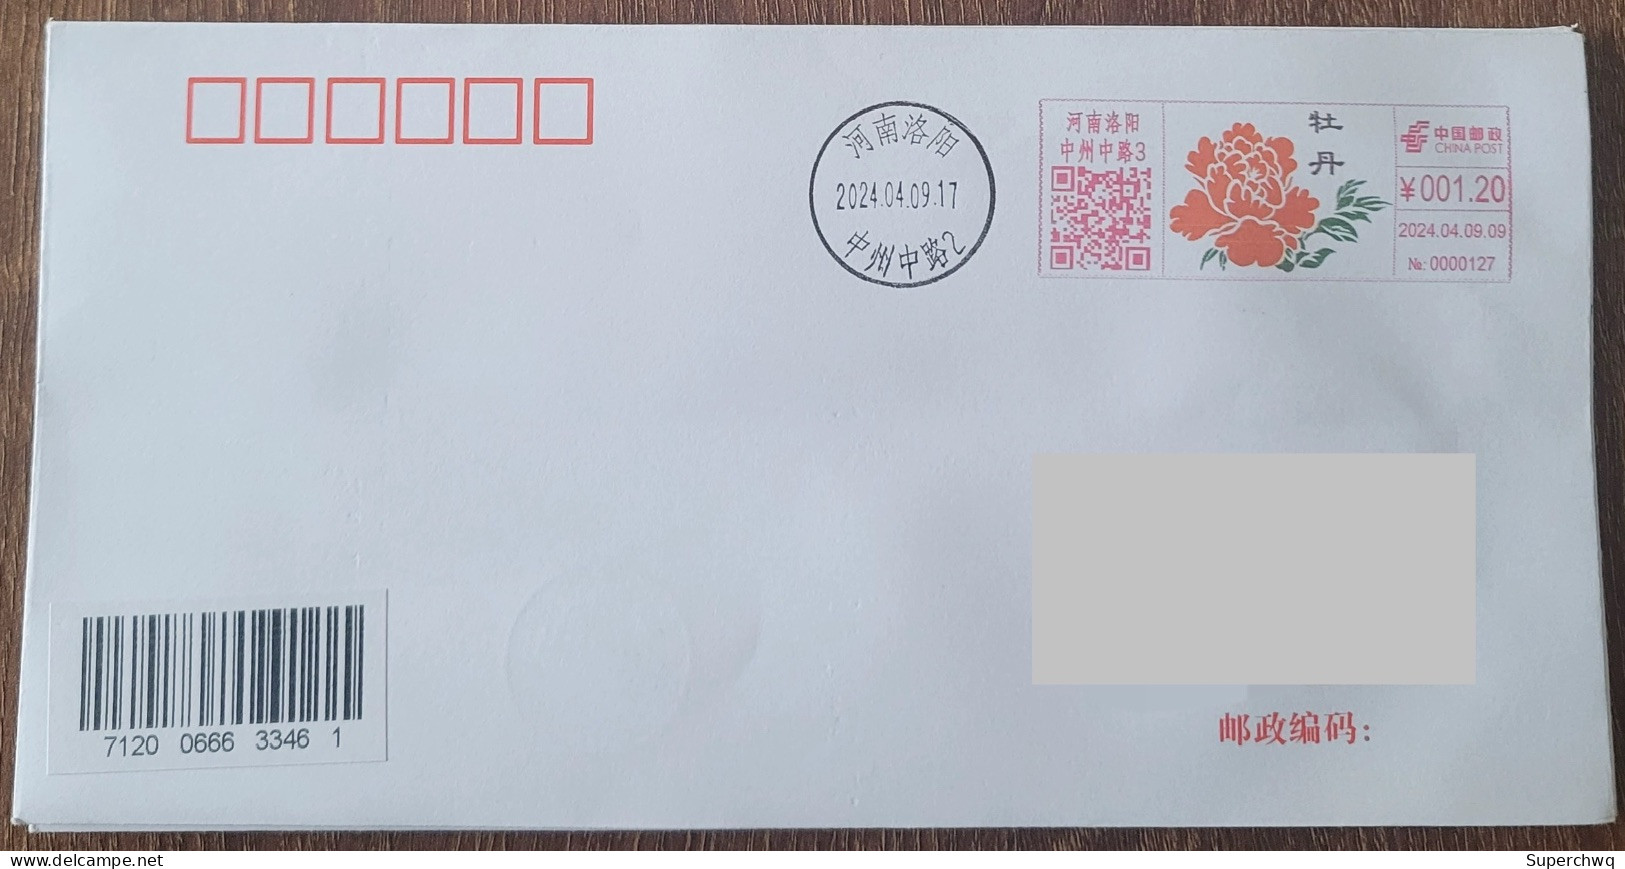 China Cover "Peony" (Luoyang, Henan) Colored Postage Machine Stamp First Day Actual Mail Seal - Enveloppes